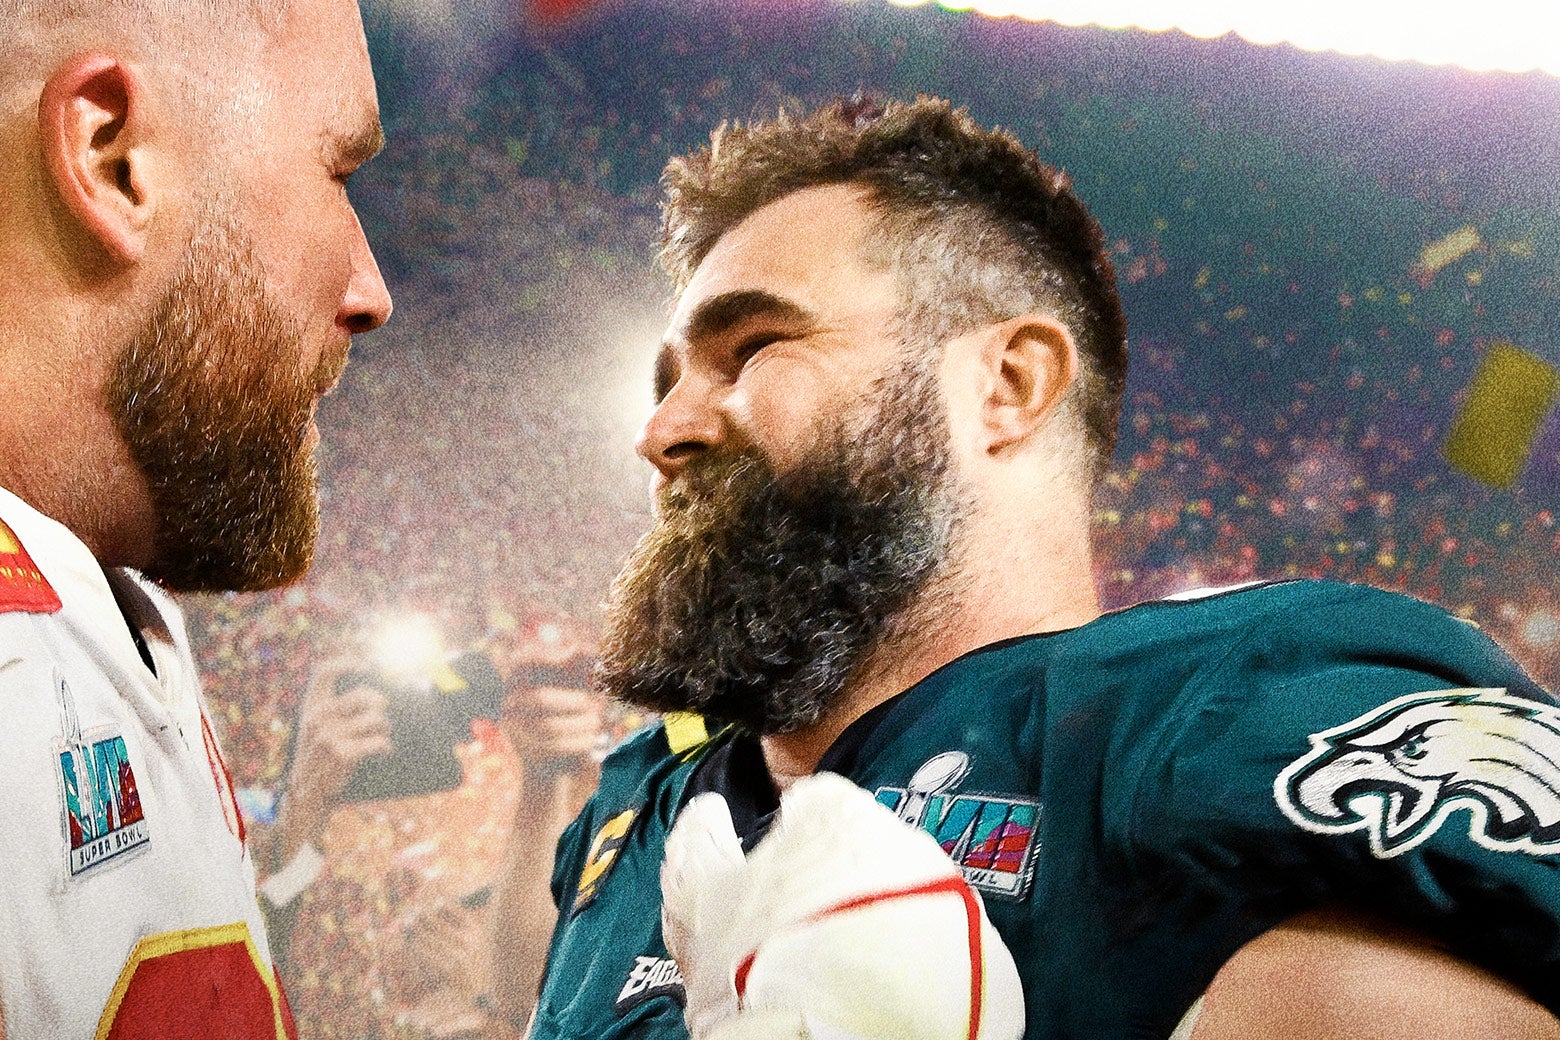 New York News Jason Kelce opposite his brother Travis Kelce on the football field.